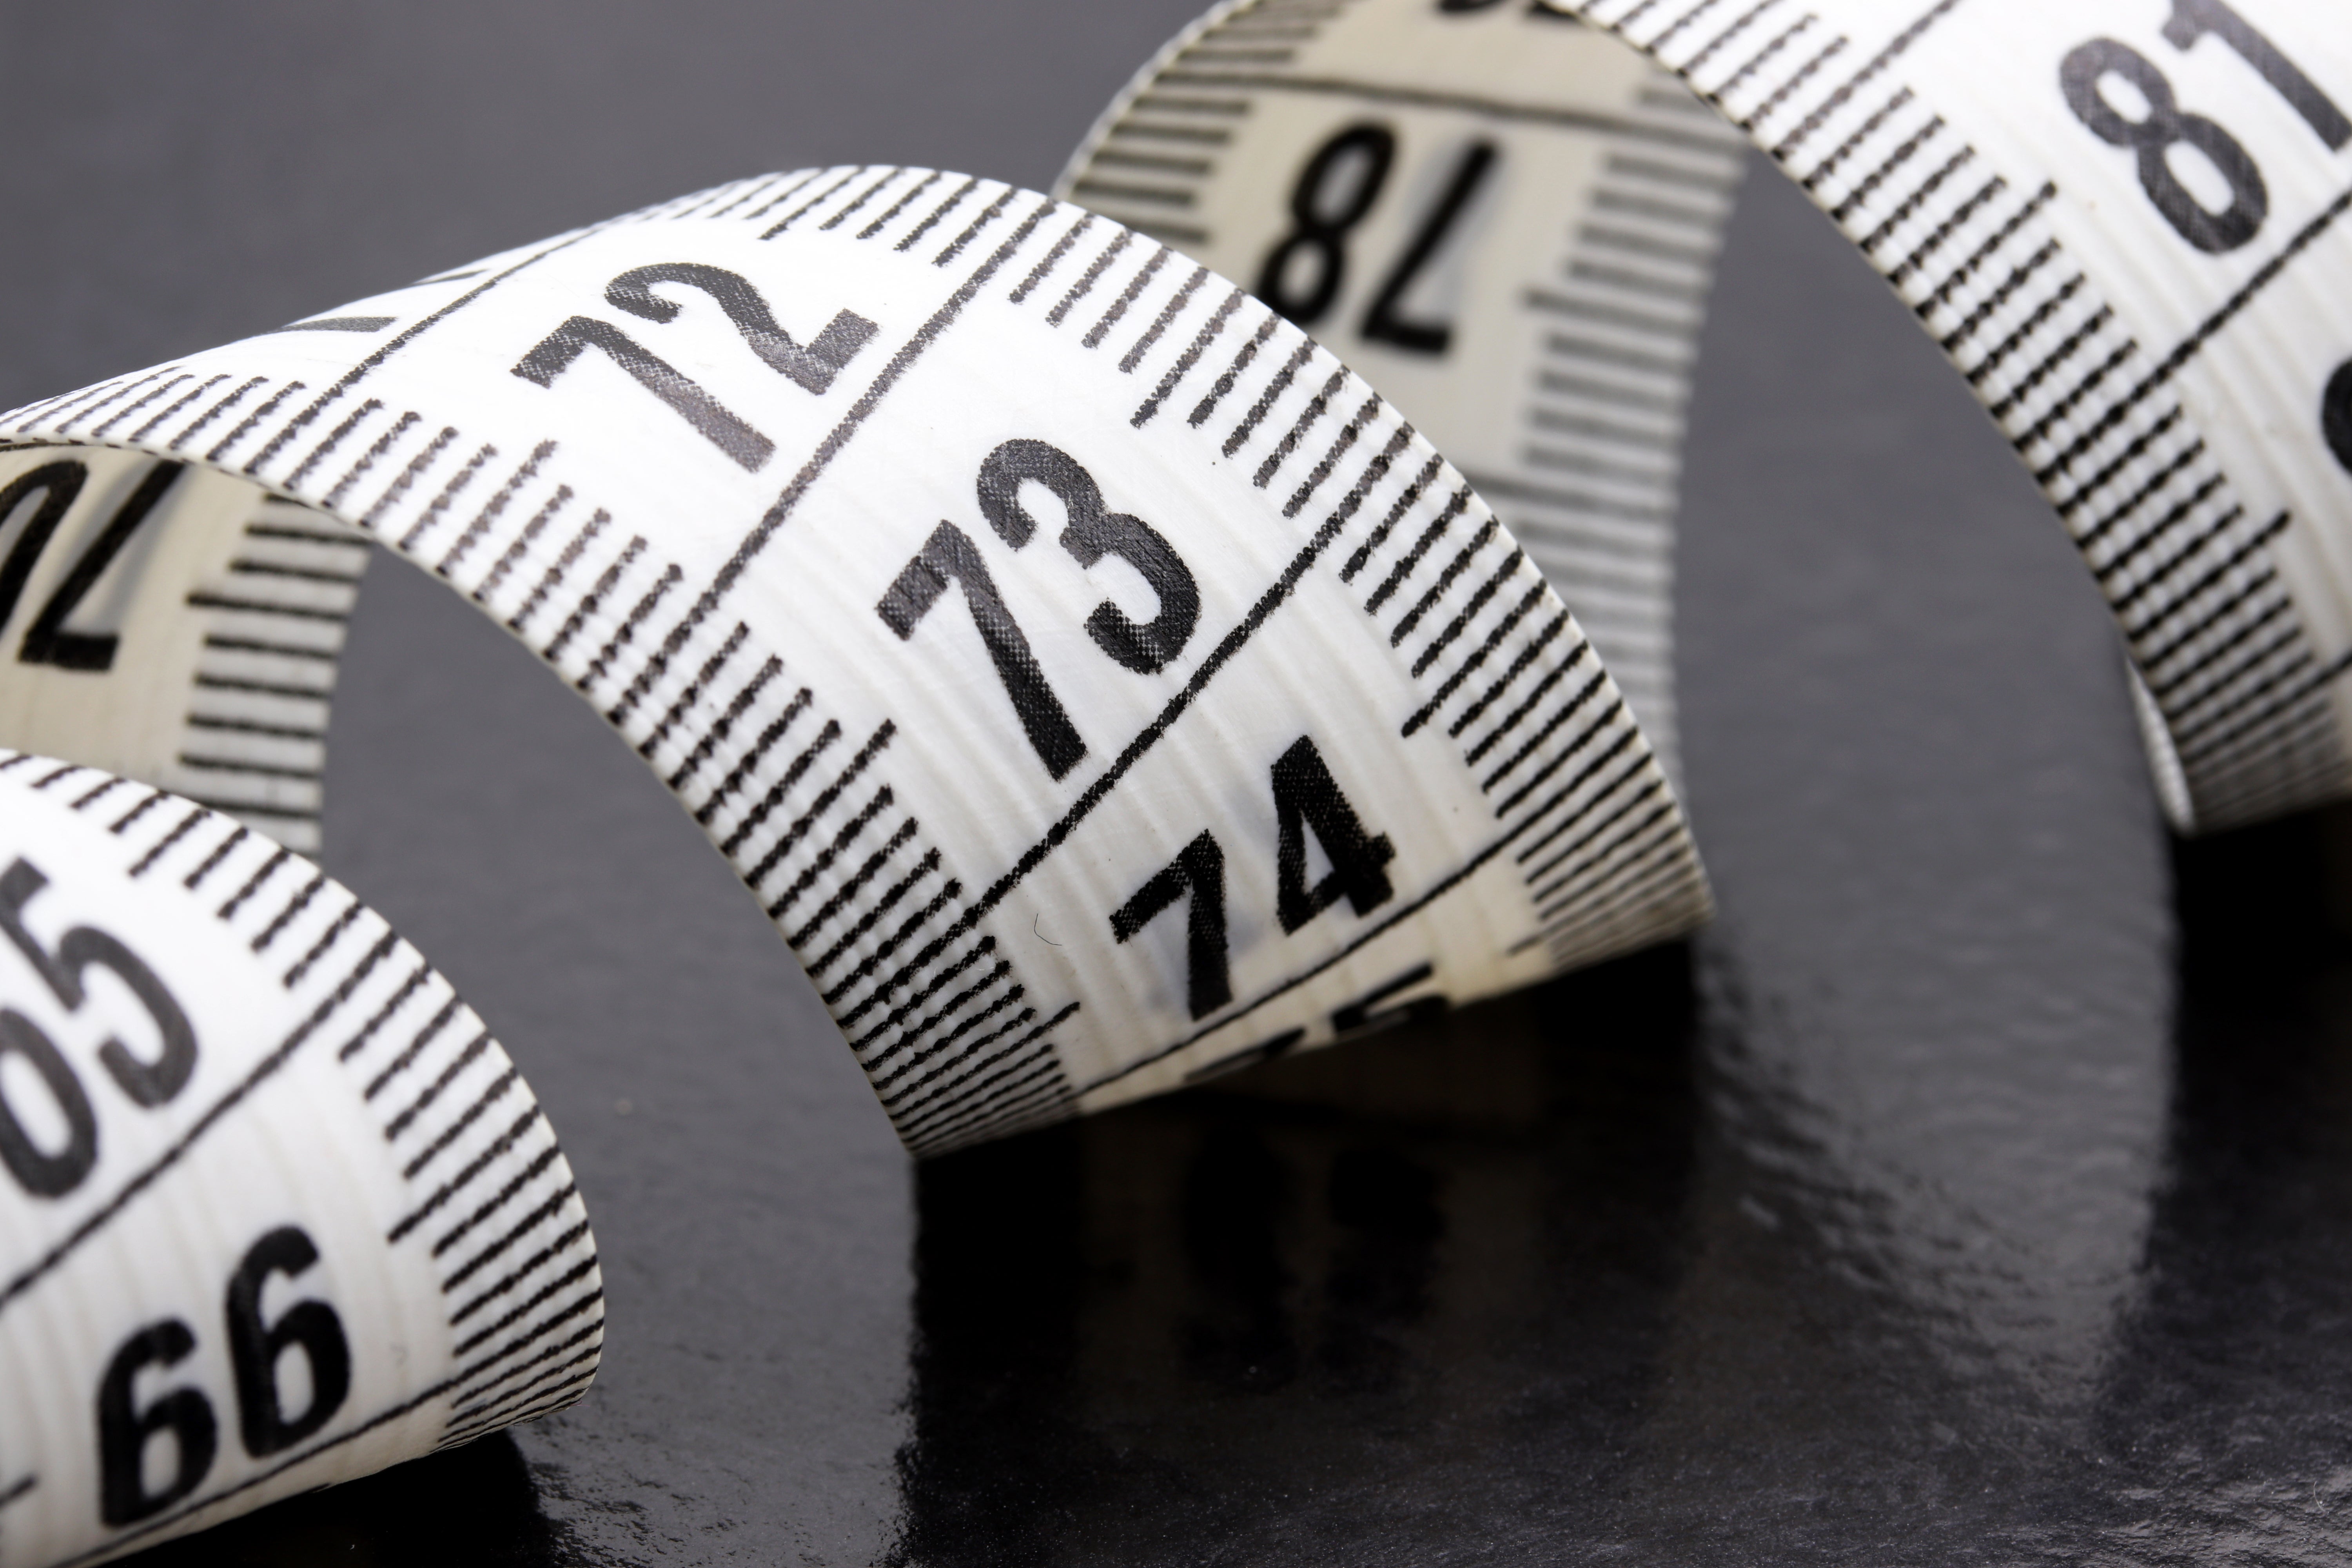 Curled white tape measure on grey surface.